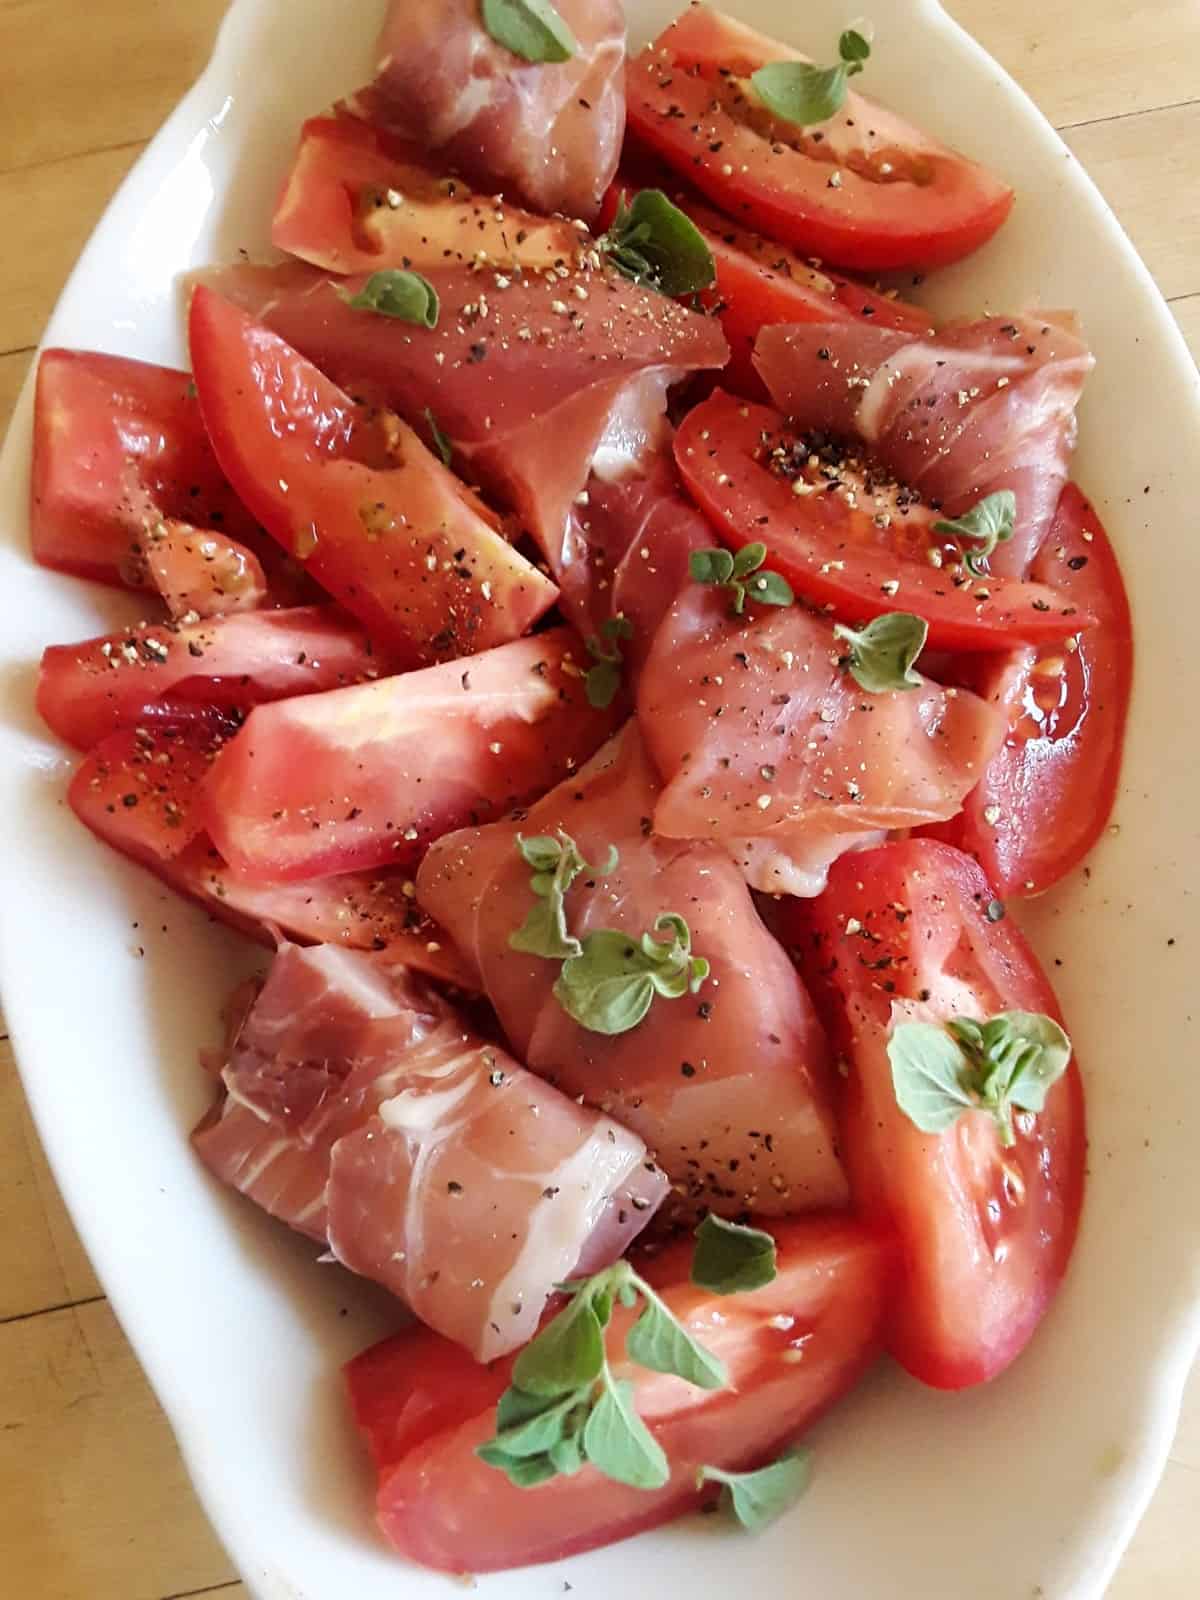 Uncooked prosciutto wrapped chicken with tomatoes and oregano in baking dish